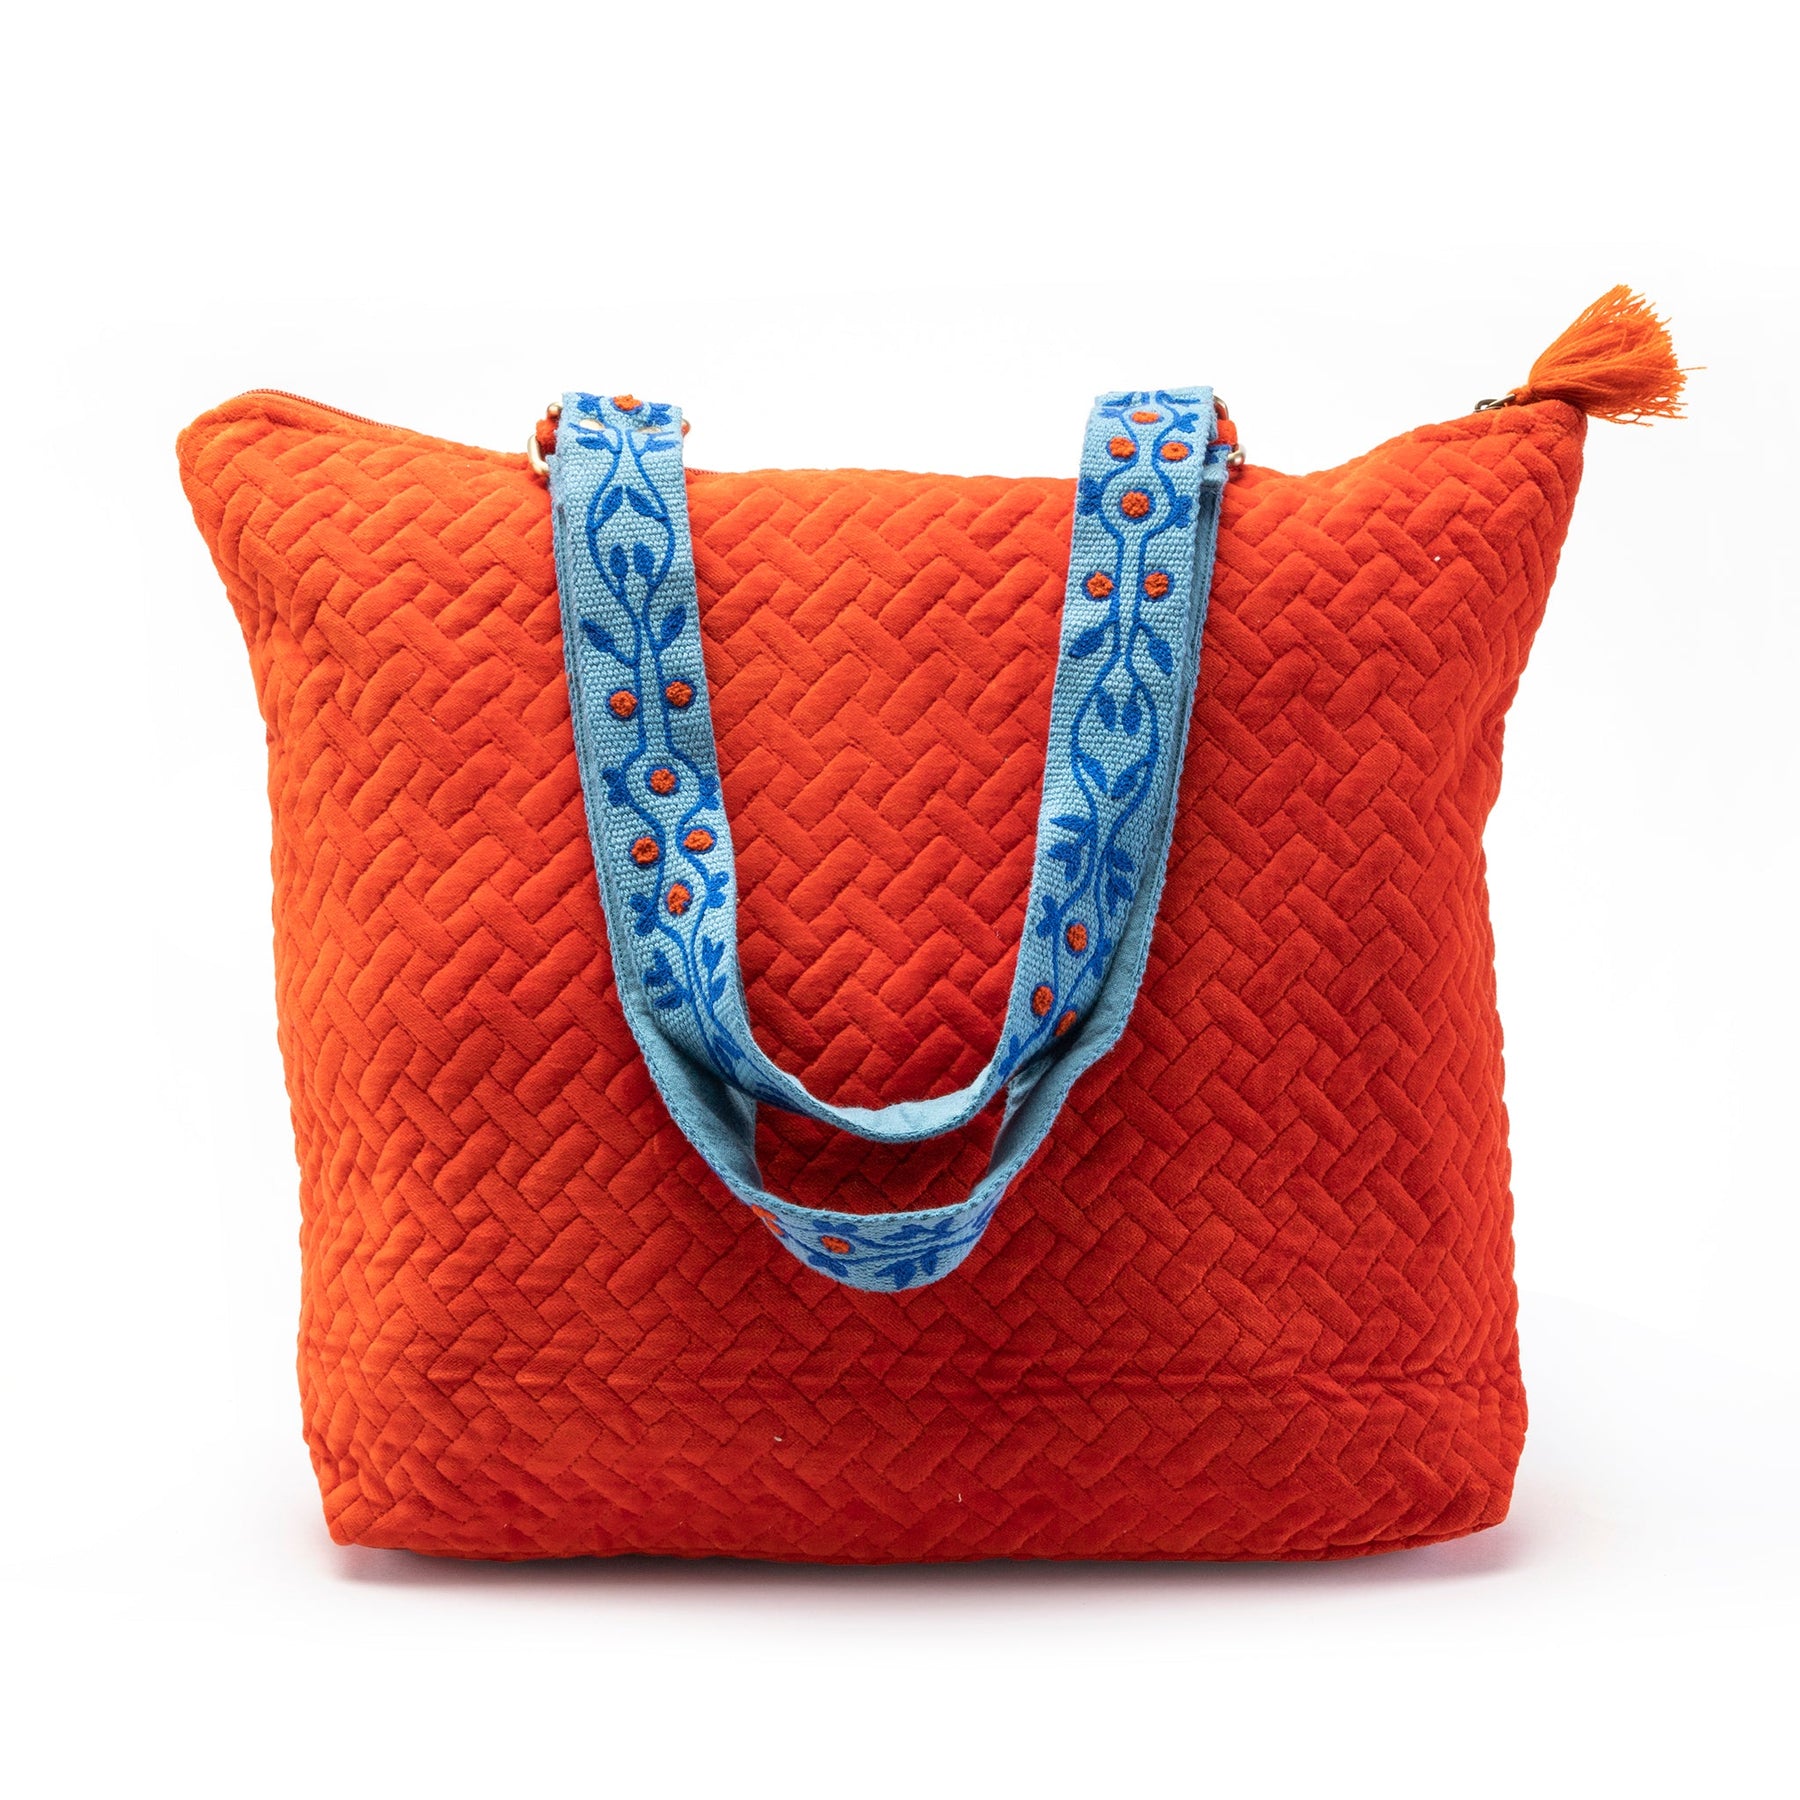 Quilted Tote Bag with Hand Embroidered Strap-Orange Vine